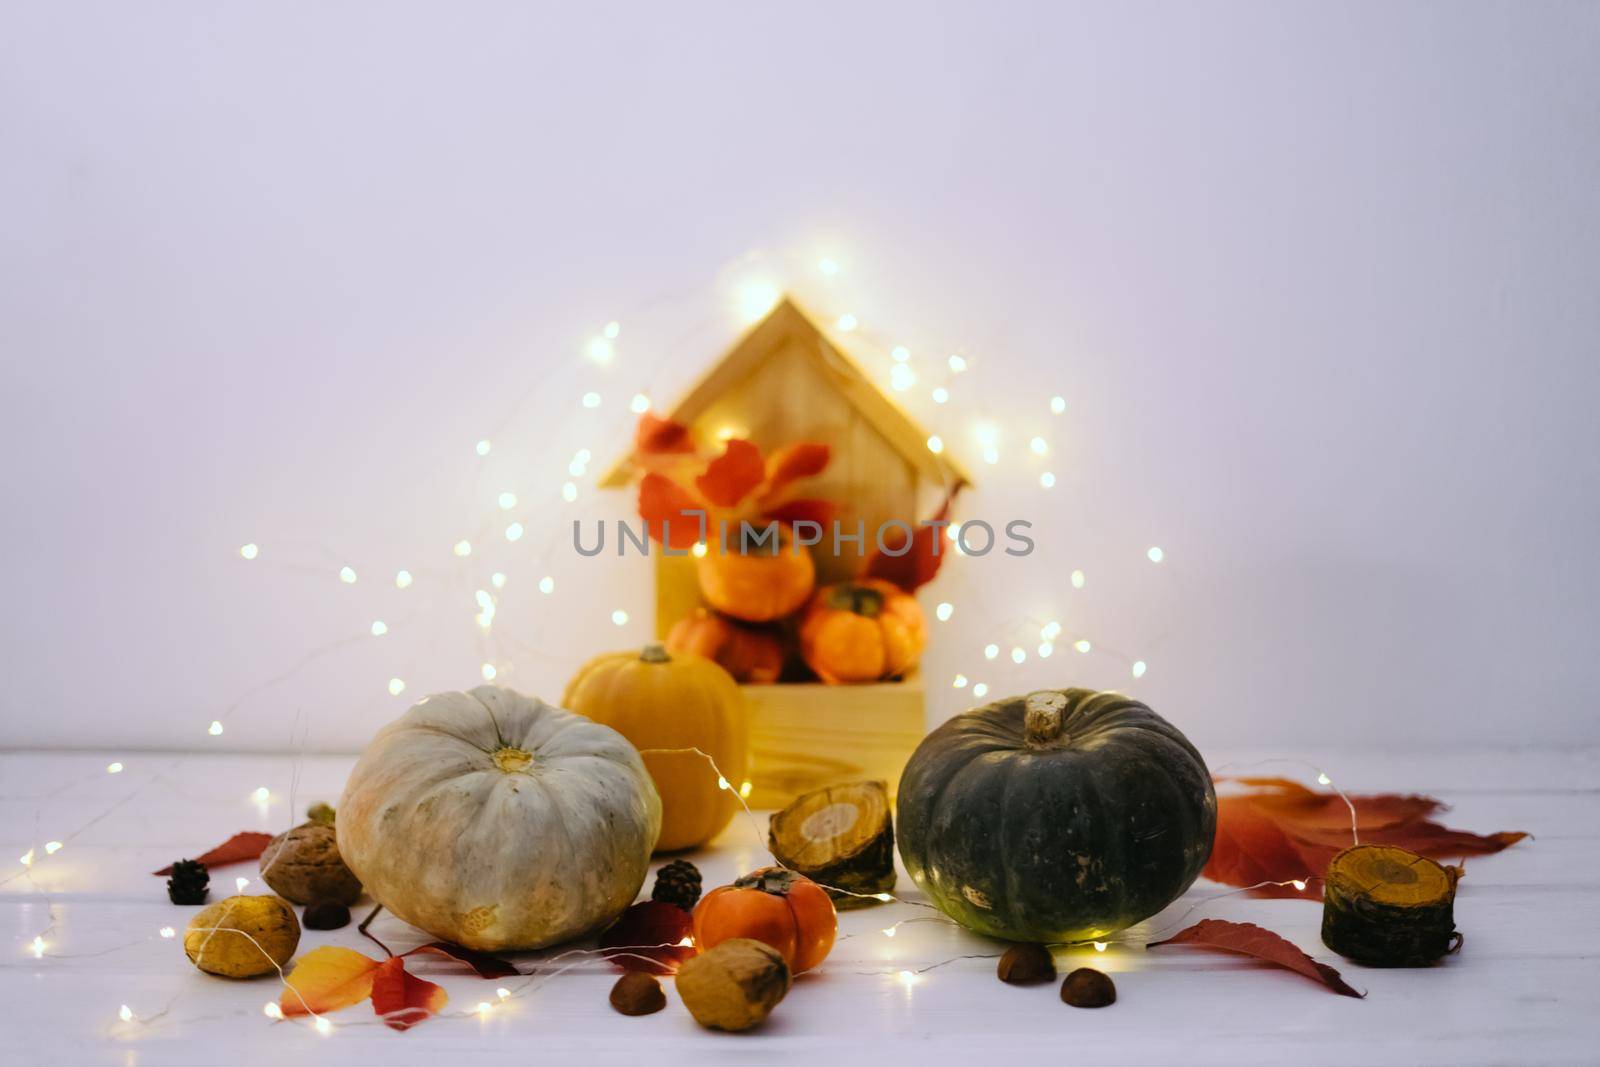 Festive composition of garland, pumpkin, nuts, persimmons and autumn red leaves. by Rodnova